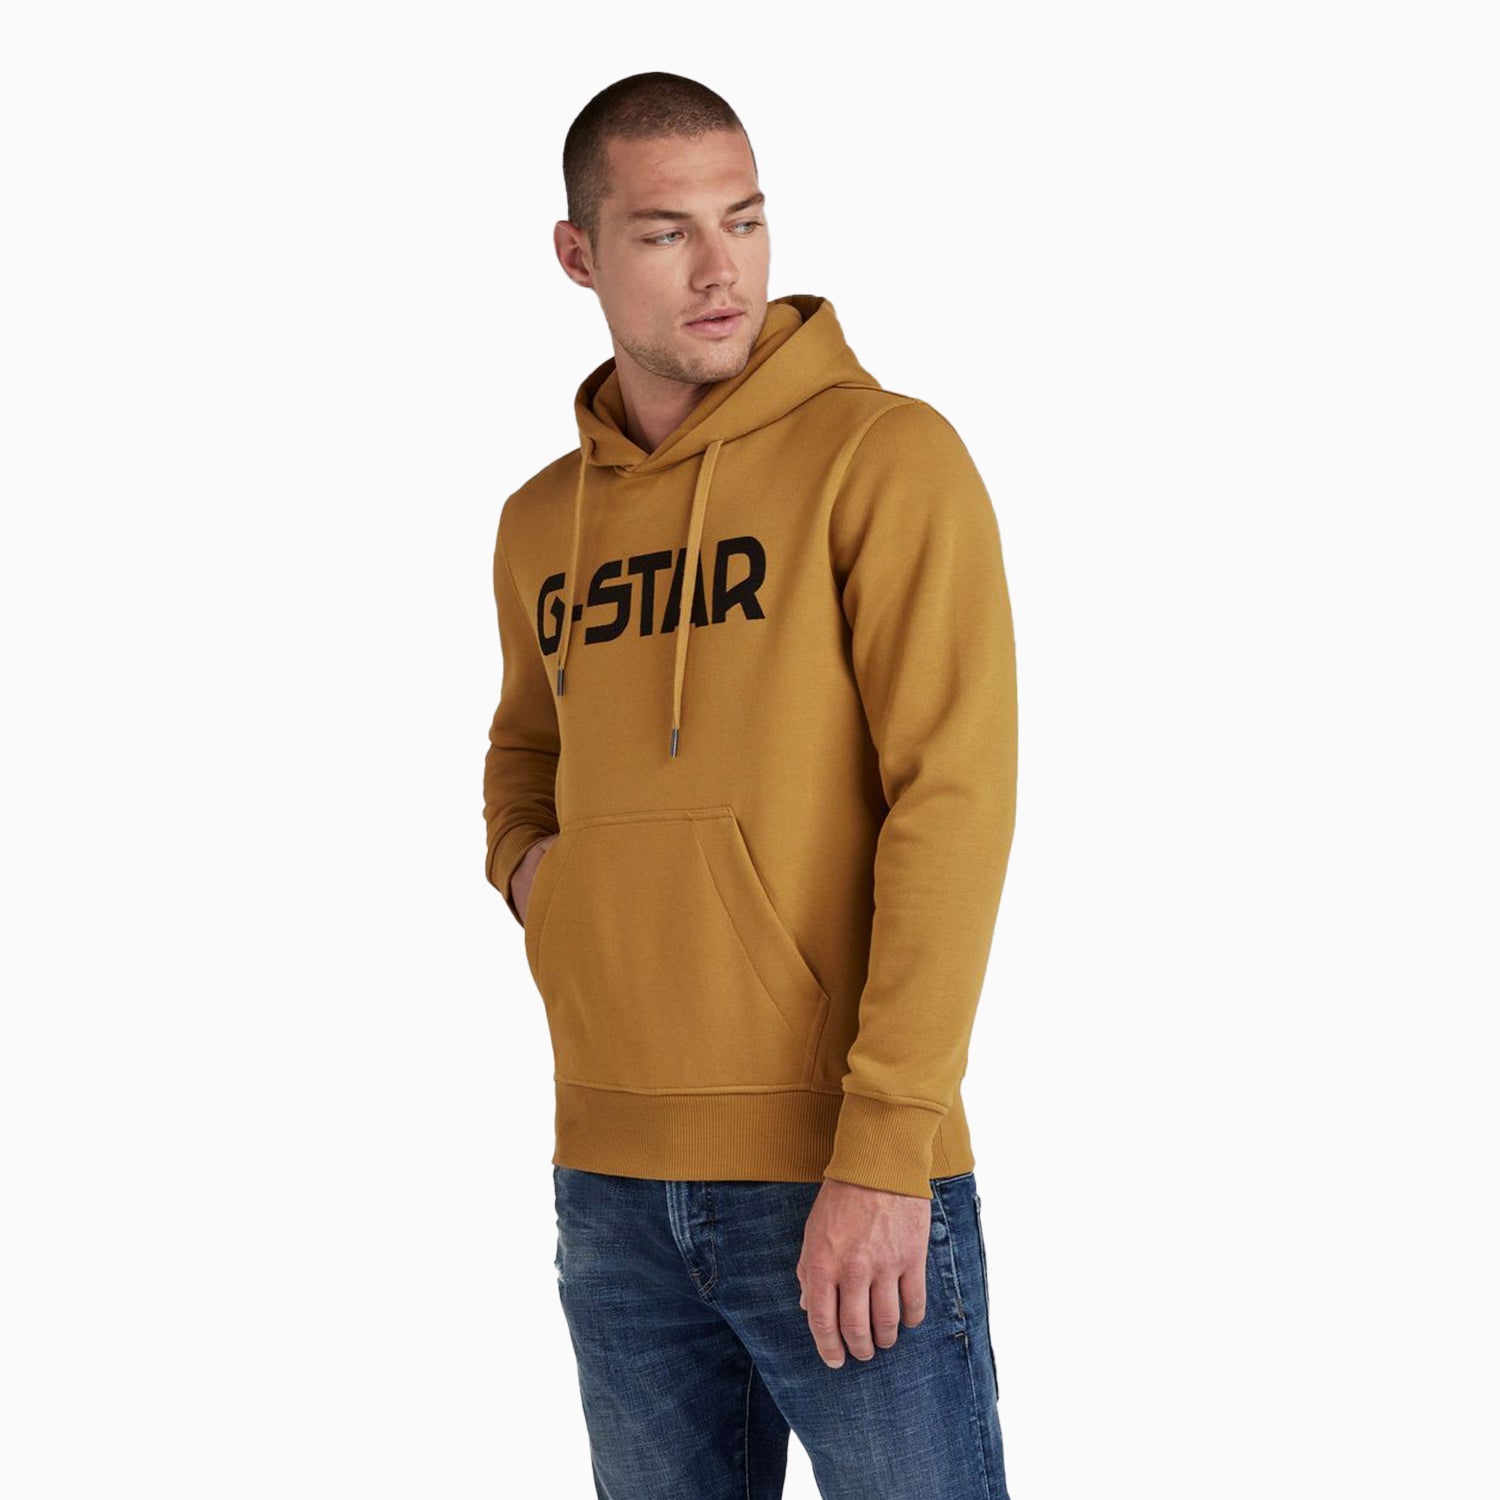 g-star-raw-mens-g-star-logo-pull-over-hoodie-d20508-a971-c623